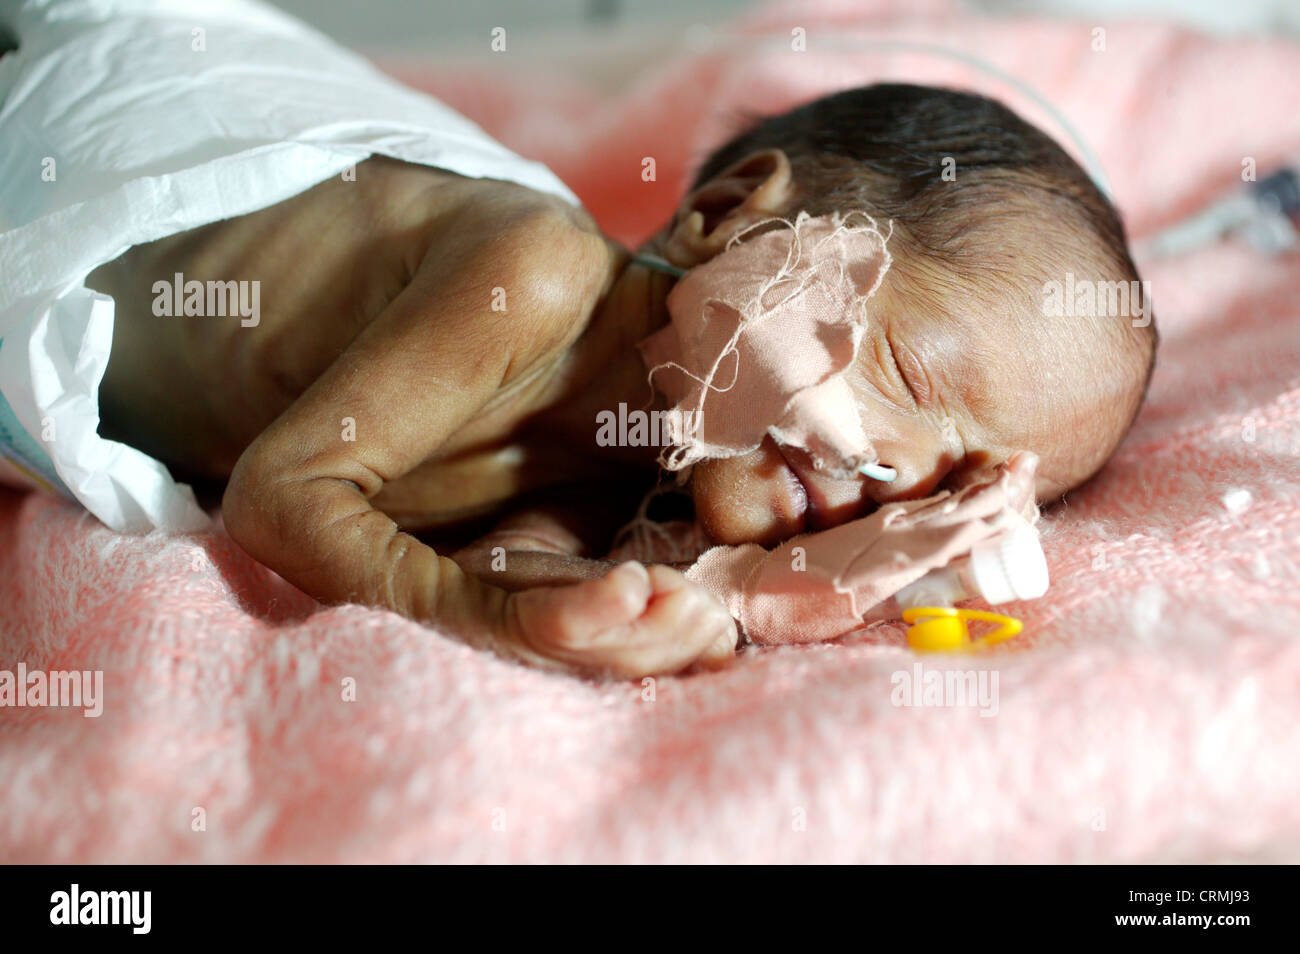 A 5 day old baby born premature at 31 weeks weighing 1kg. The baby is suffering with respiratory distress syndrome and jaundice. Stock Photo